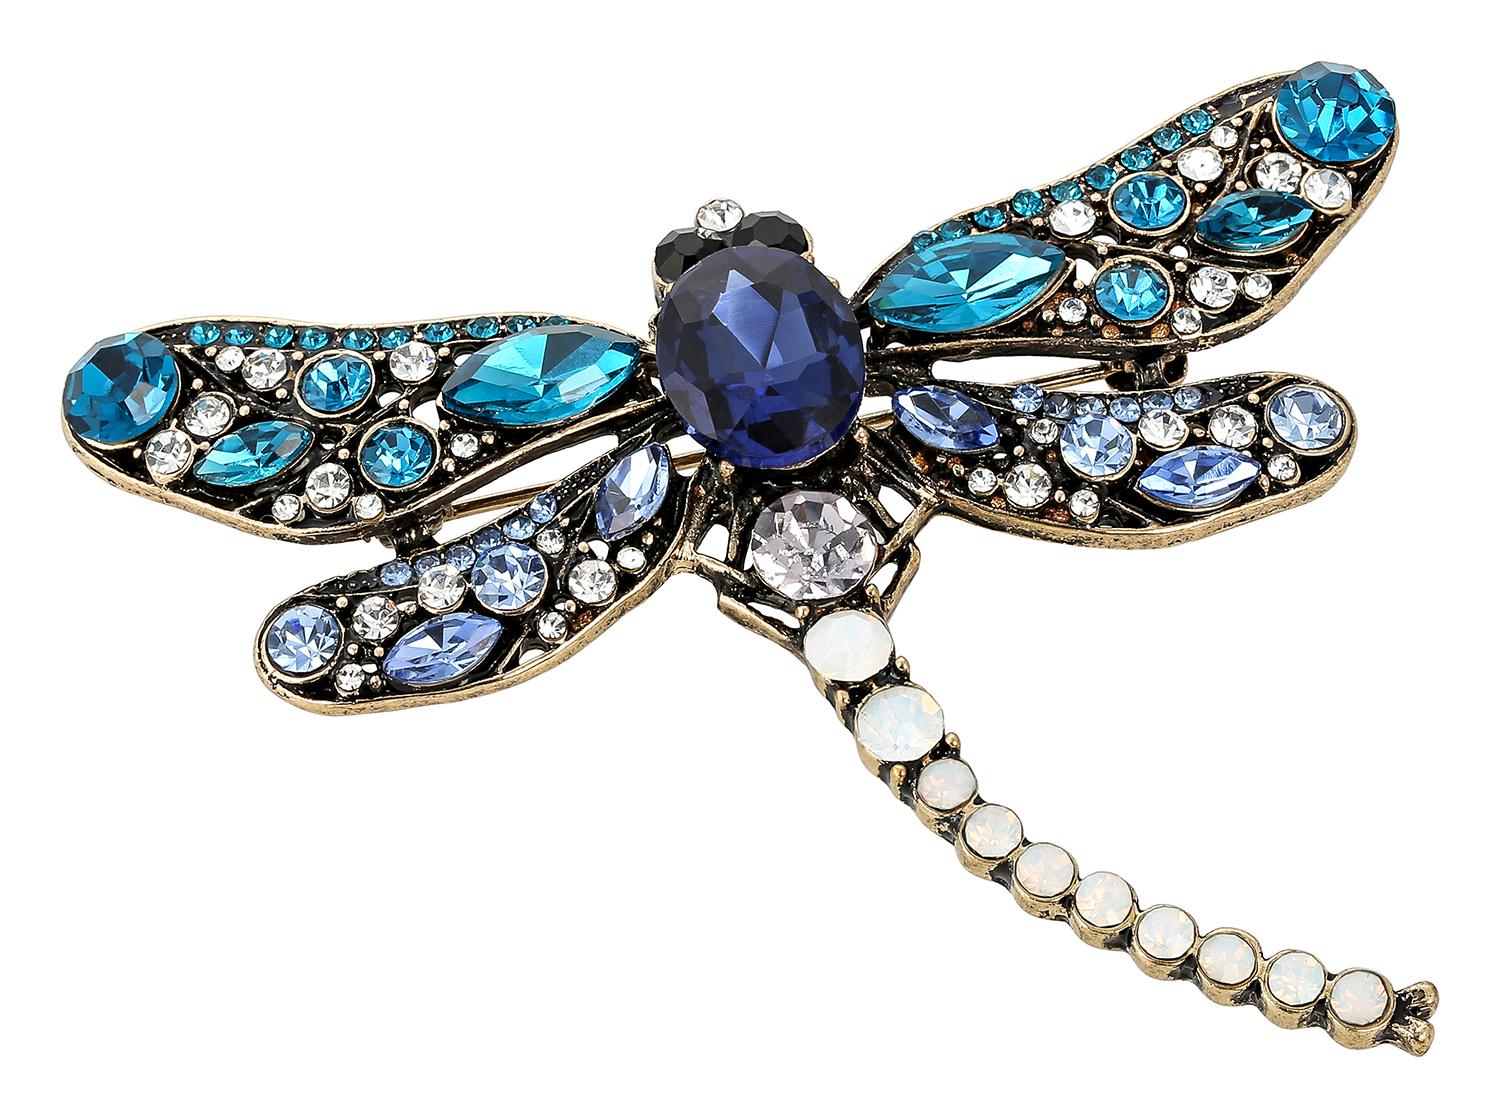  Broche - Antique Dragonfly 